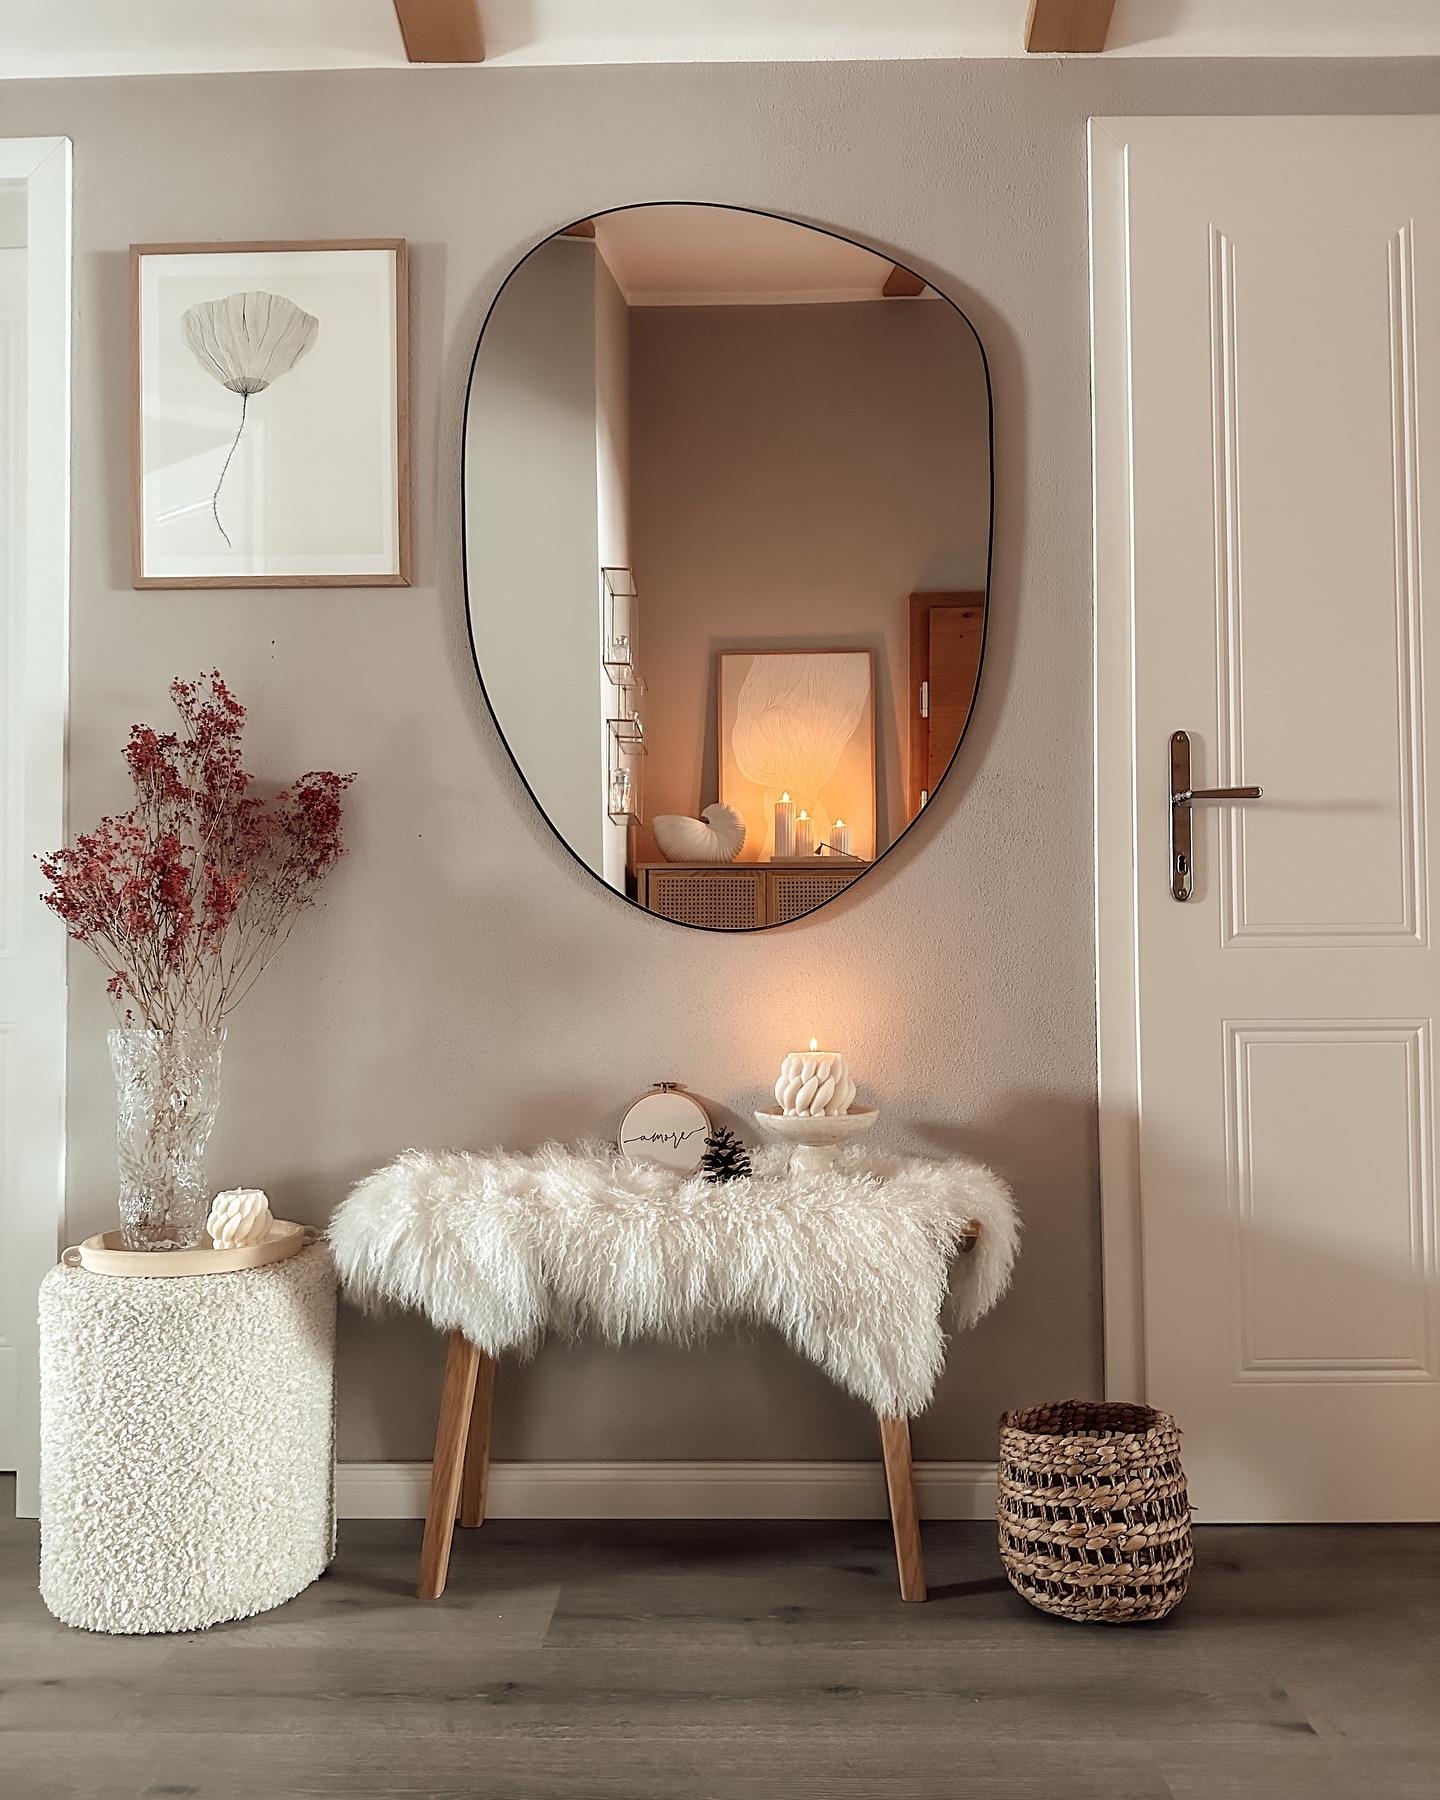 a console table styled with a plush blanket, a floor basket, and a wall mirror above make for the perfect accessories to decorate for a simple and neutral-toned winter entryway